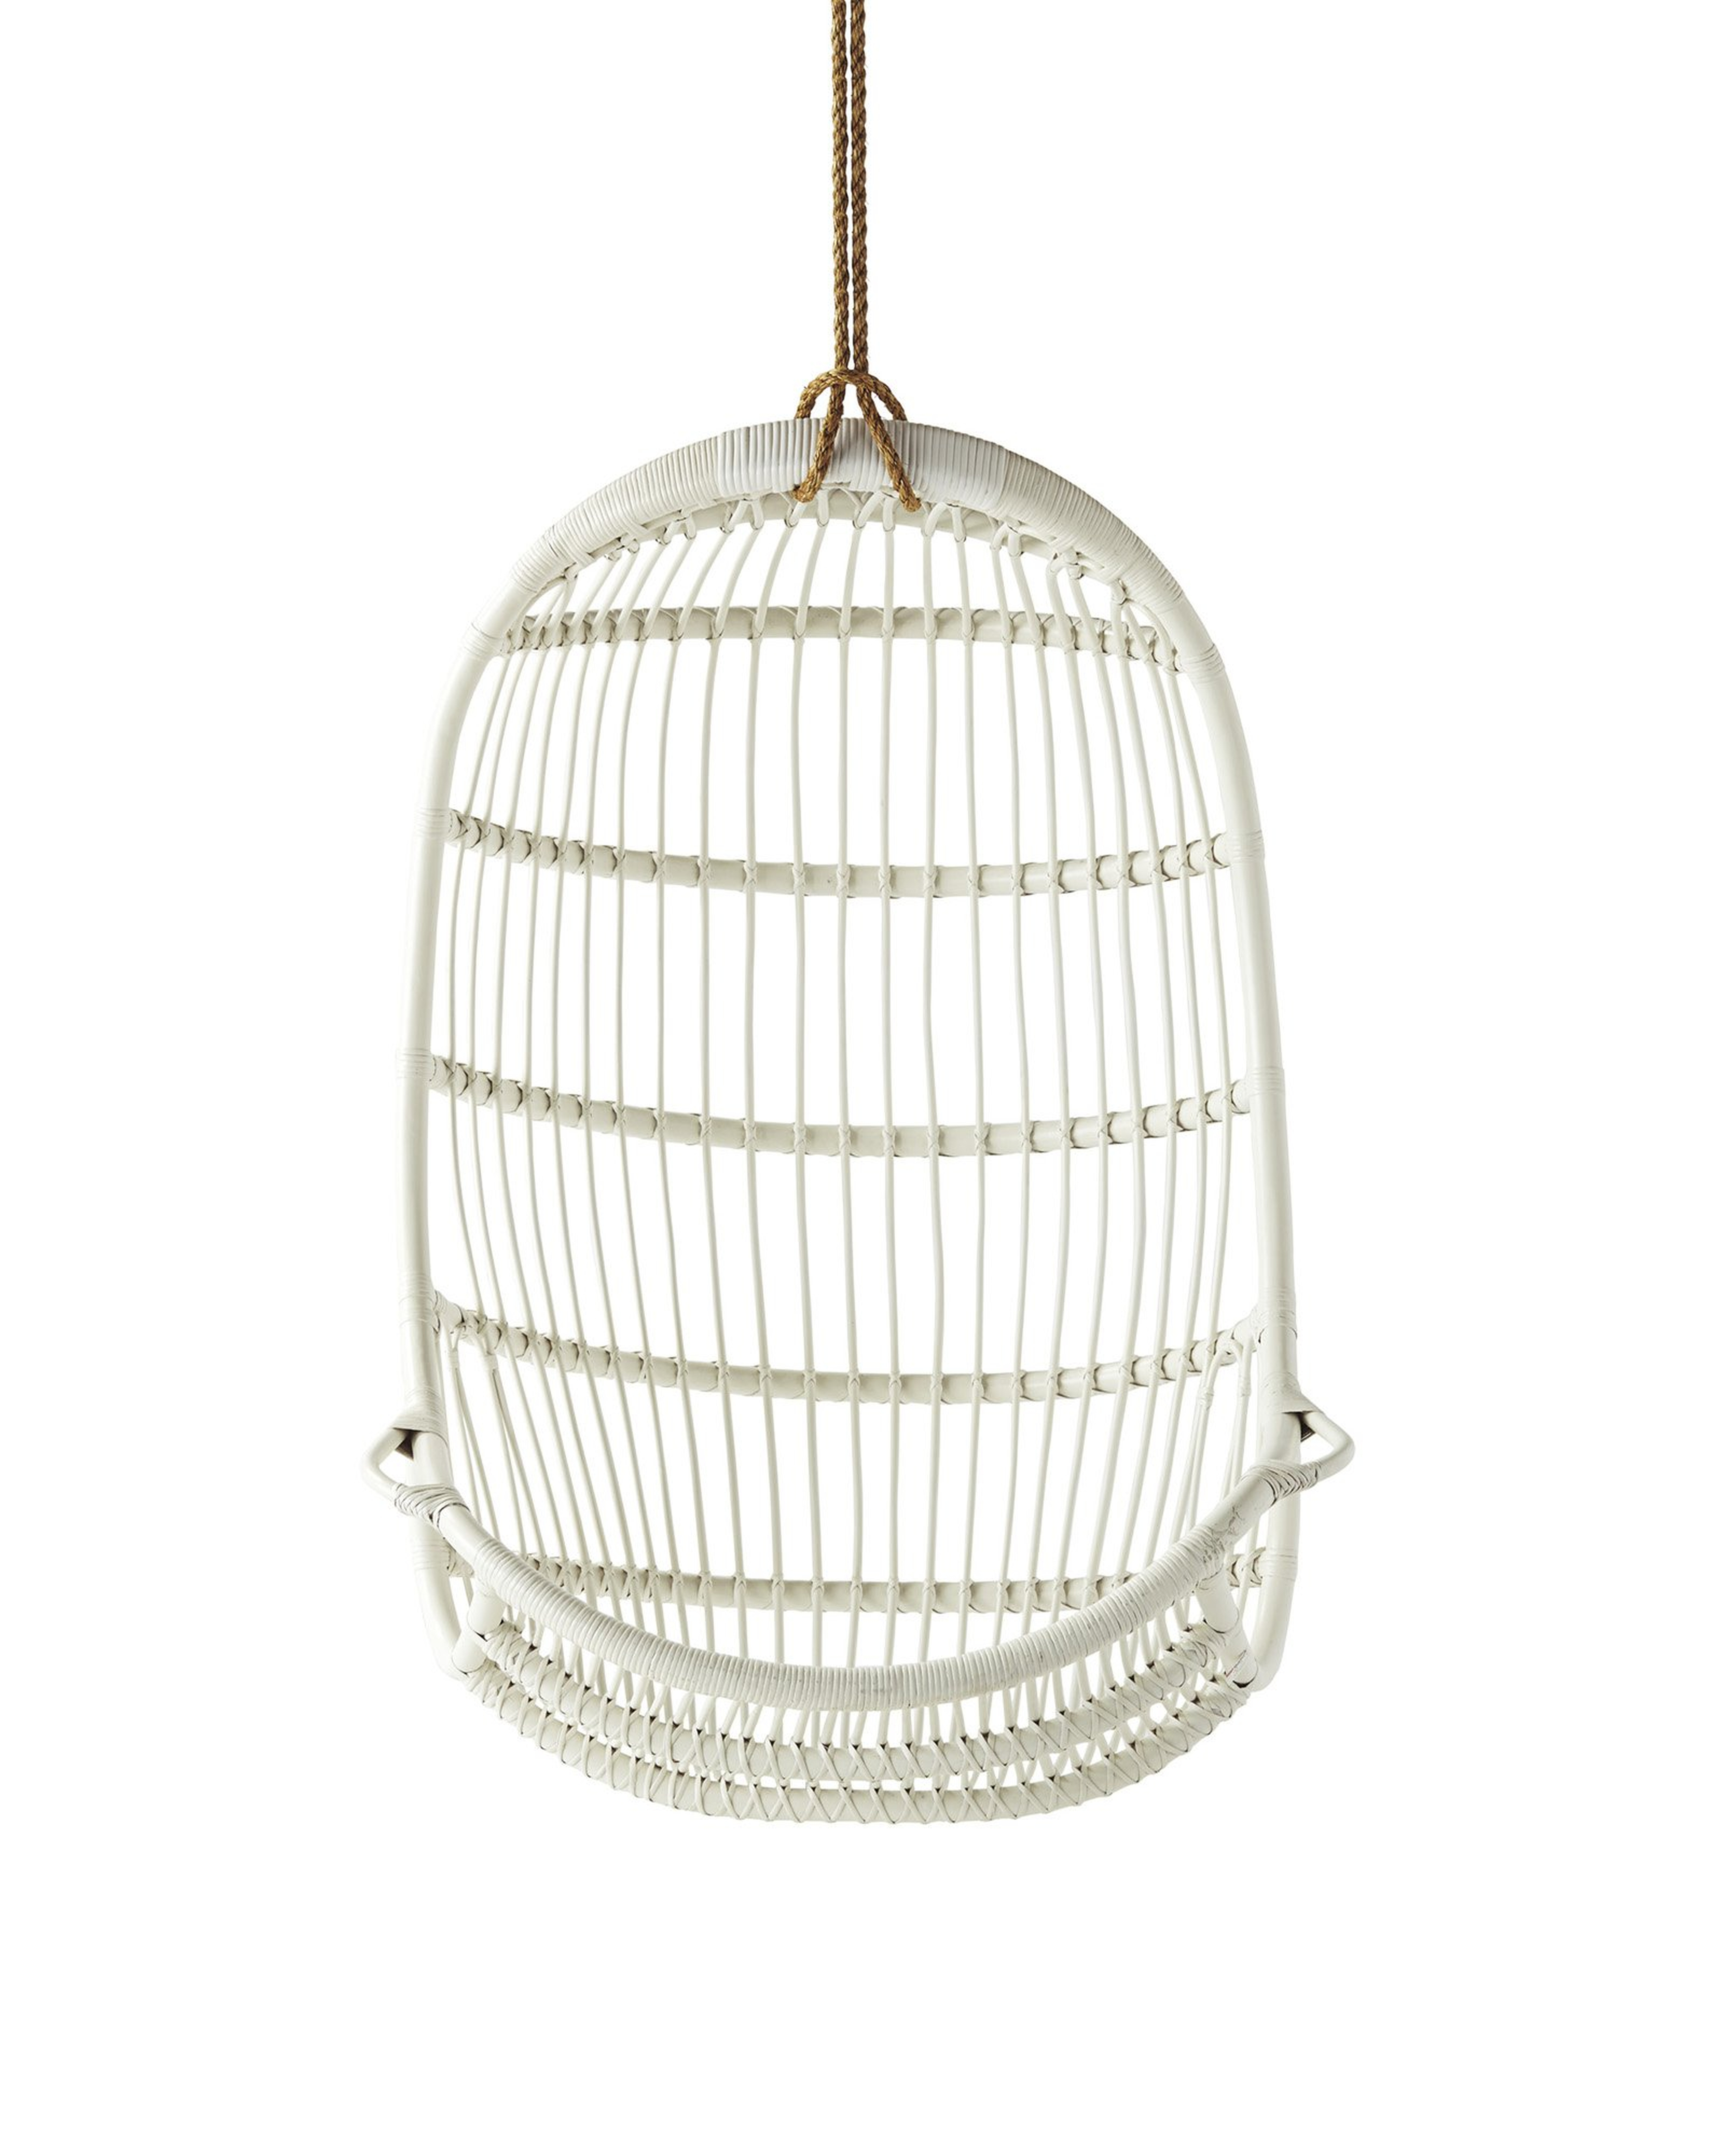 Hanging Rattan Chair - White - Serena and Lily